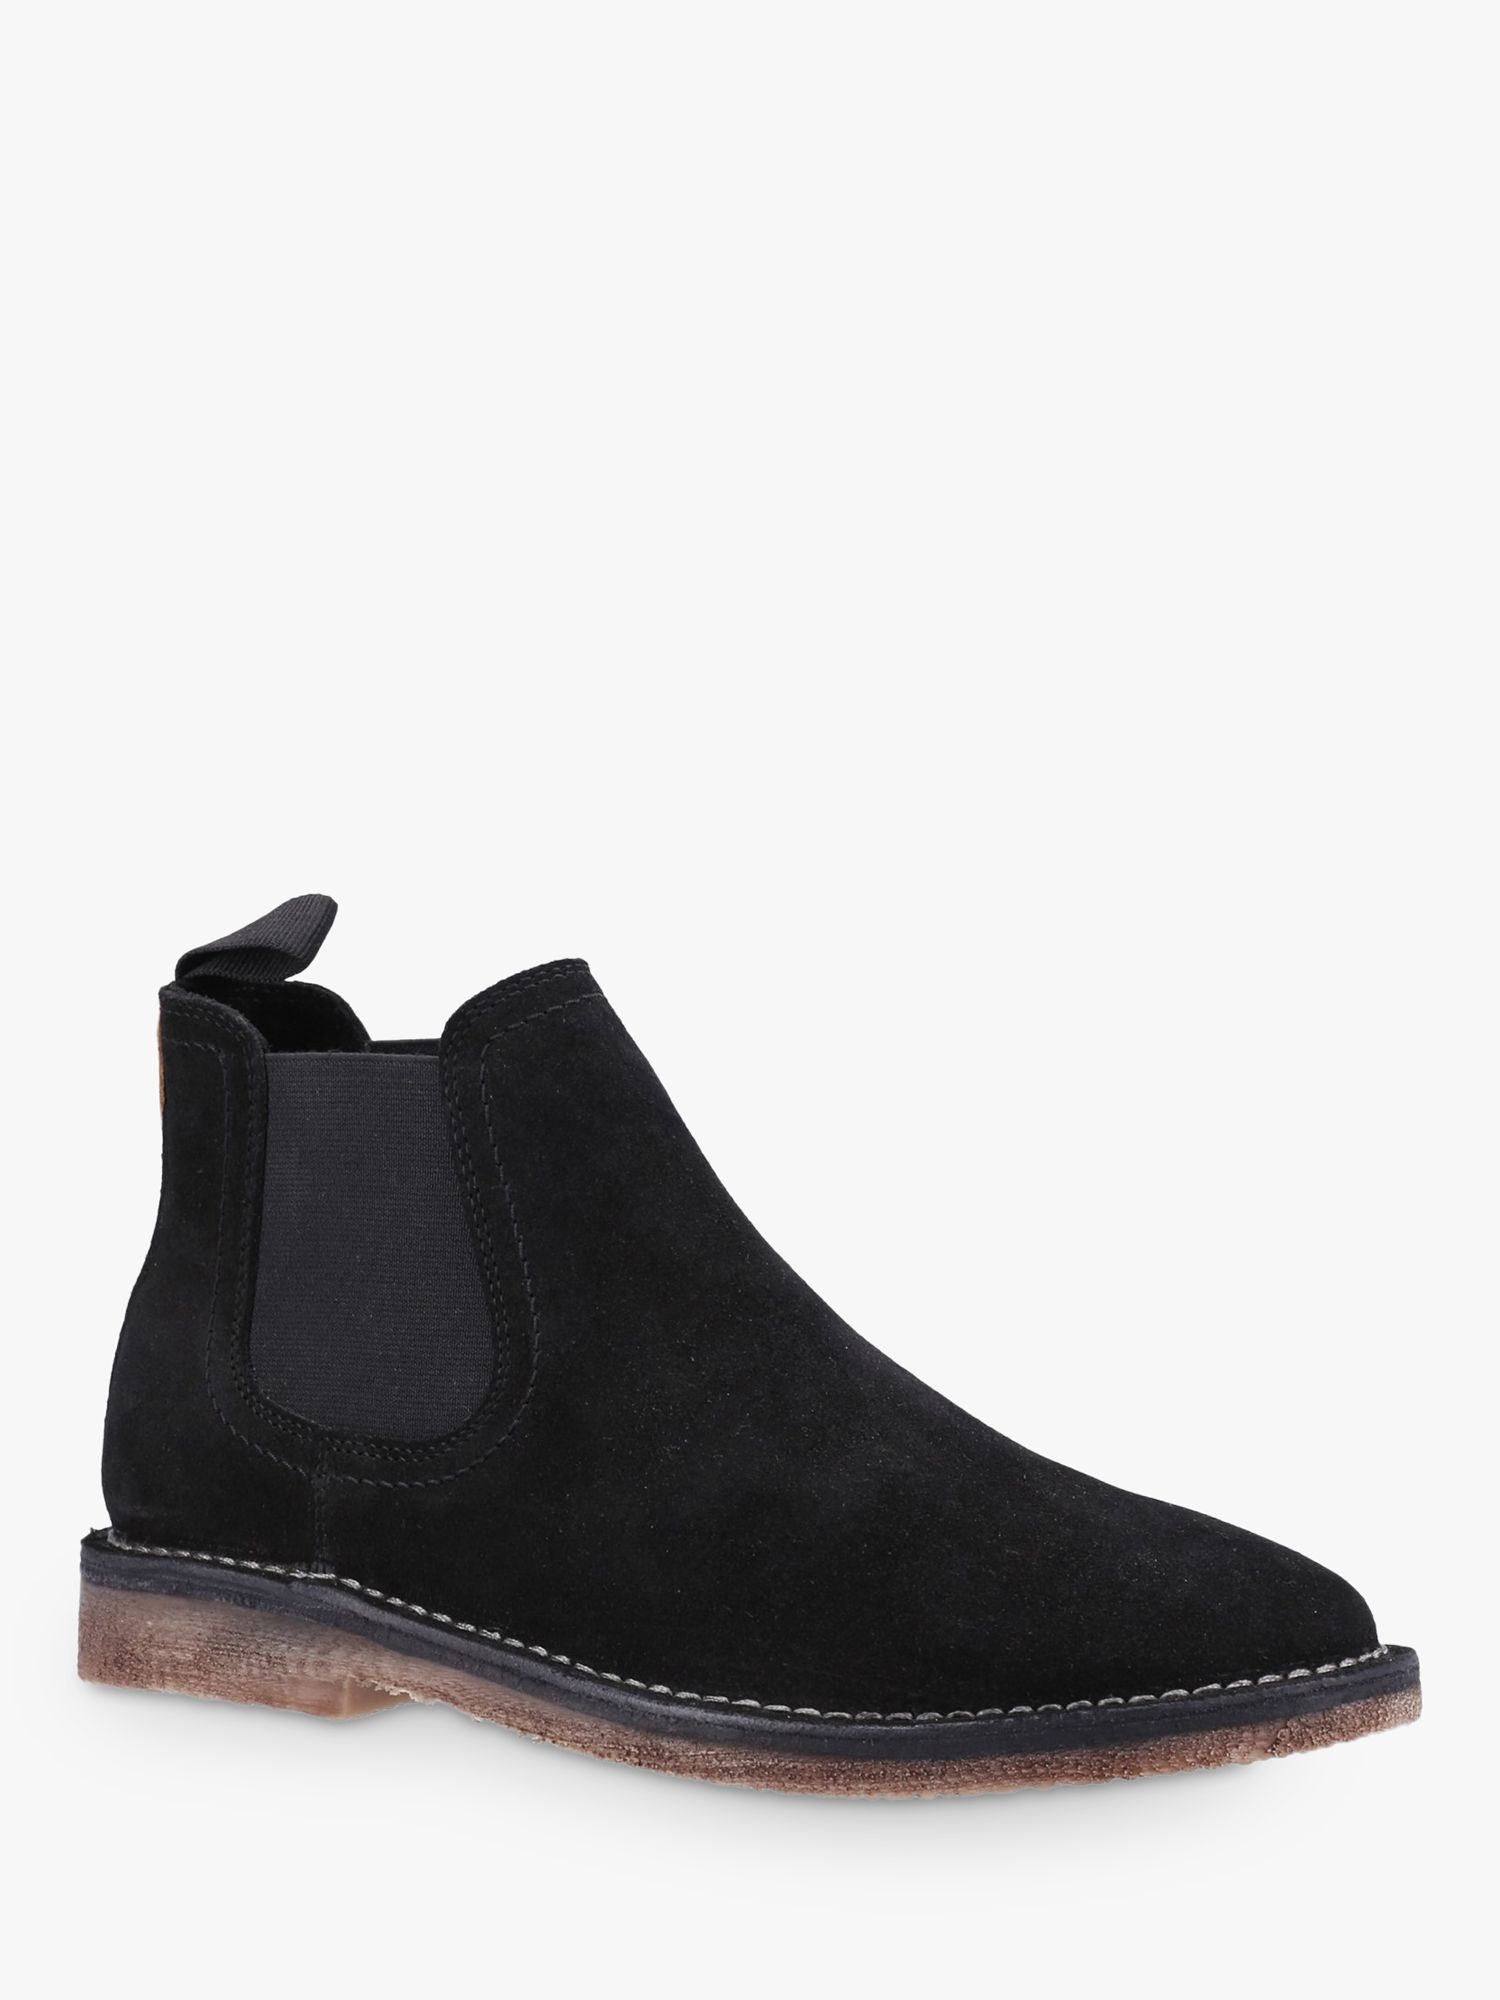 Hush Puppies Shaun Leather Chelsea Boots, Black at John Lewis & Partners